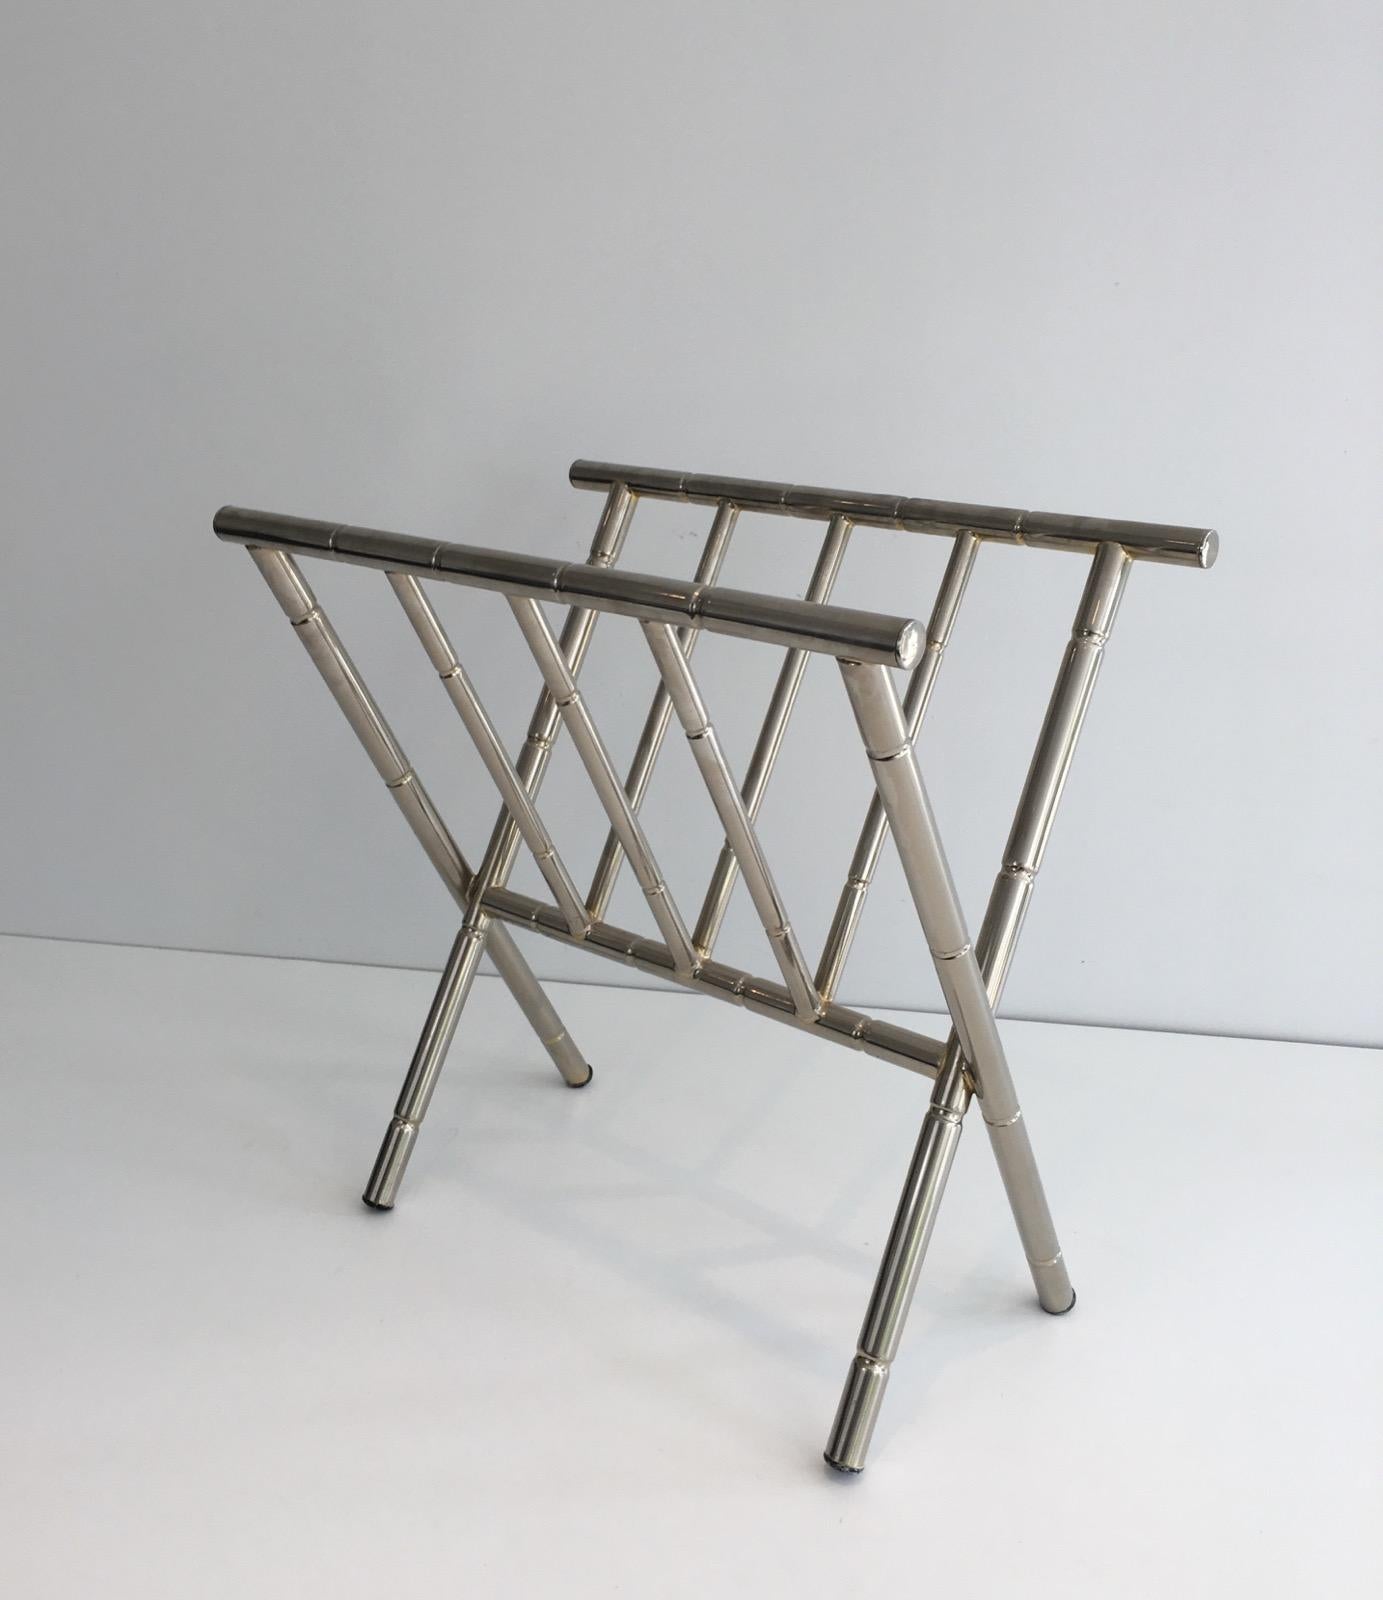 This magazine rack is made of nickel. This is a nice work imitating faux-bamboo, in the style of famous French designer Jacques Adnet, circa 1970.